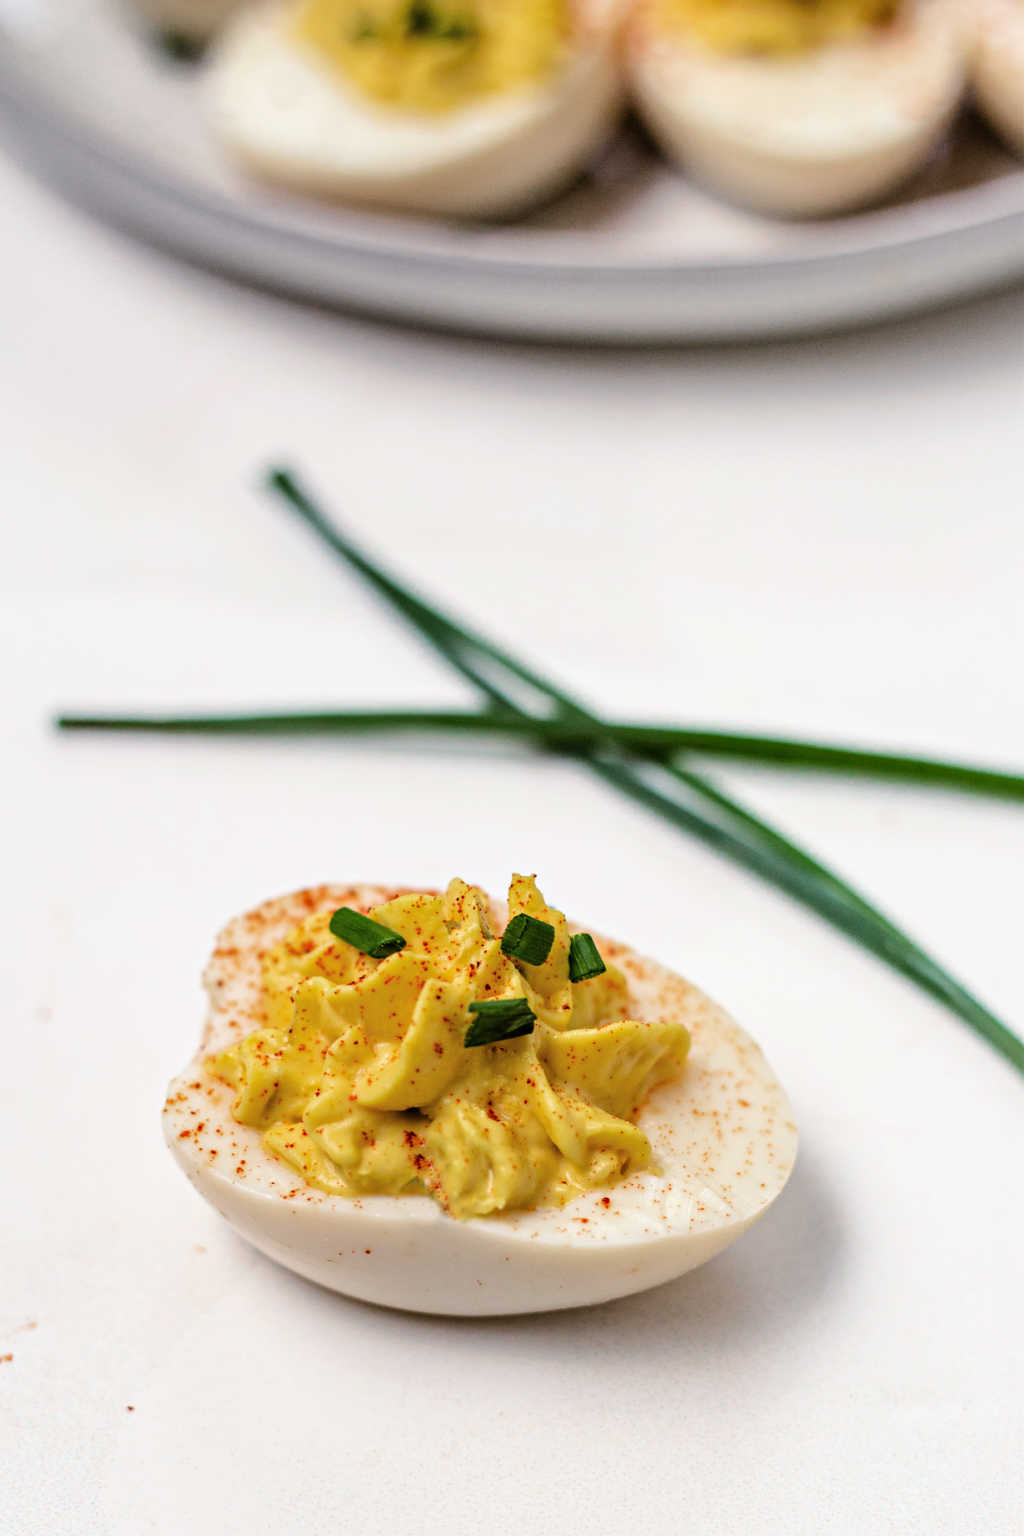 a single southern deviled egg on a table garnished with paprika and chives.